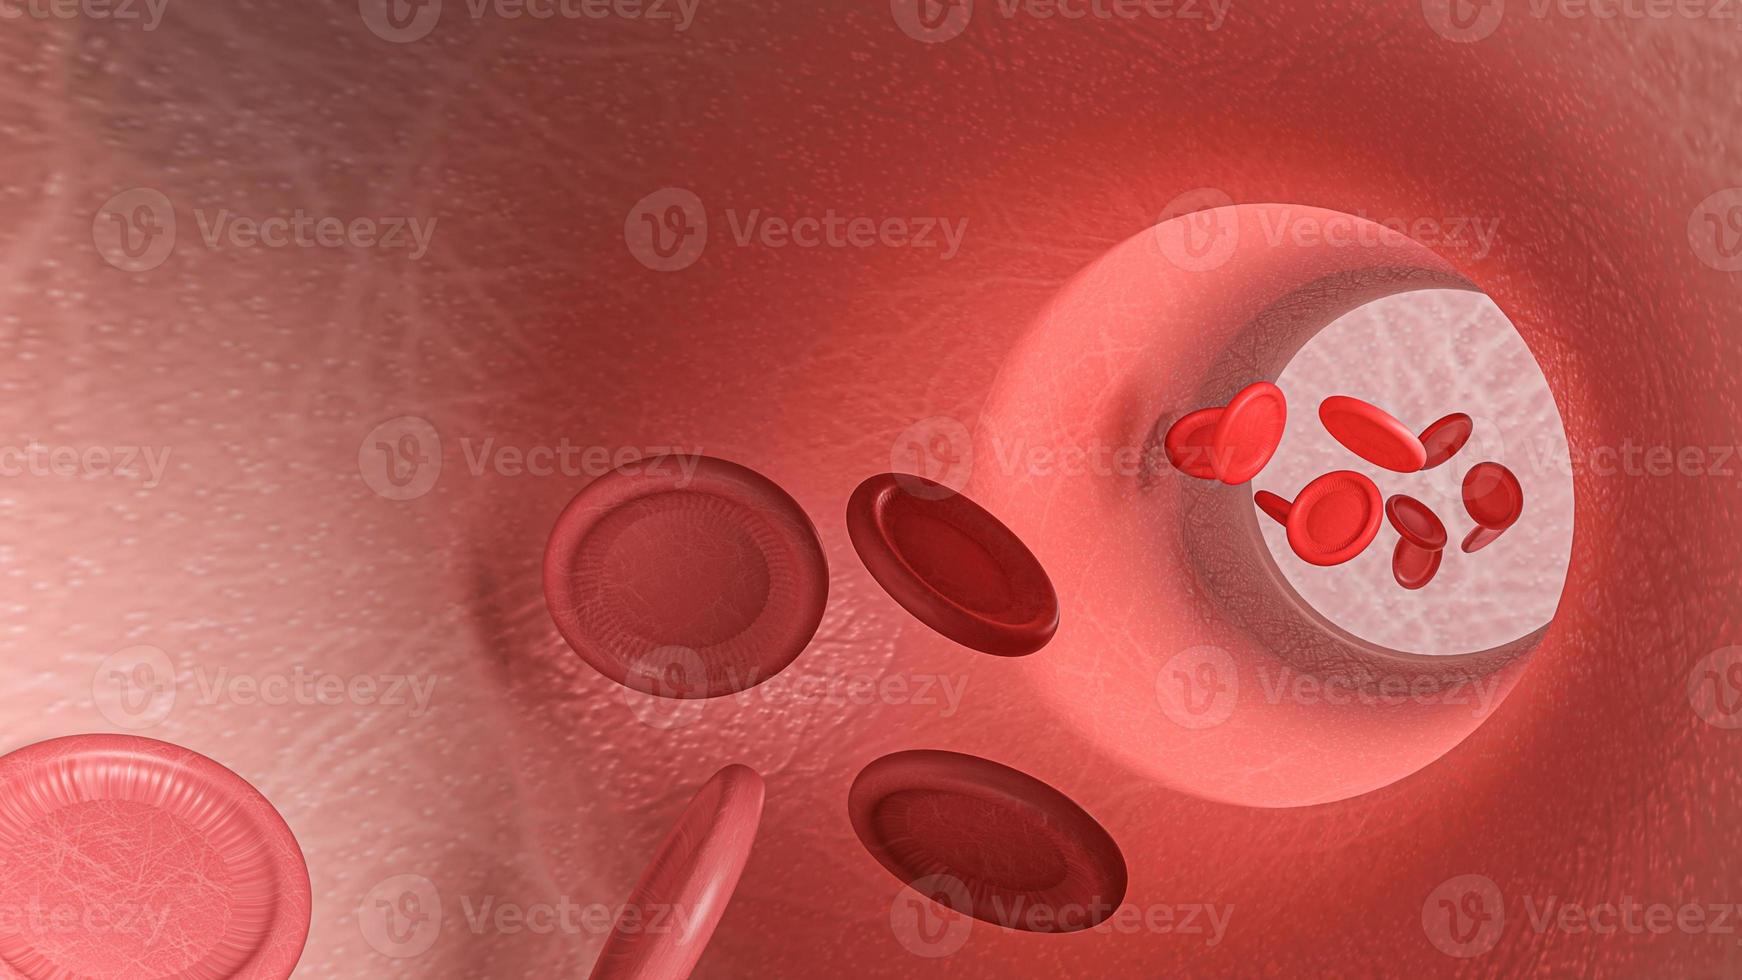 blood cell image for sci or medical concept 3d rendering photo